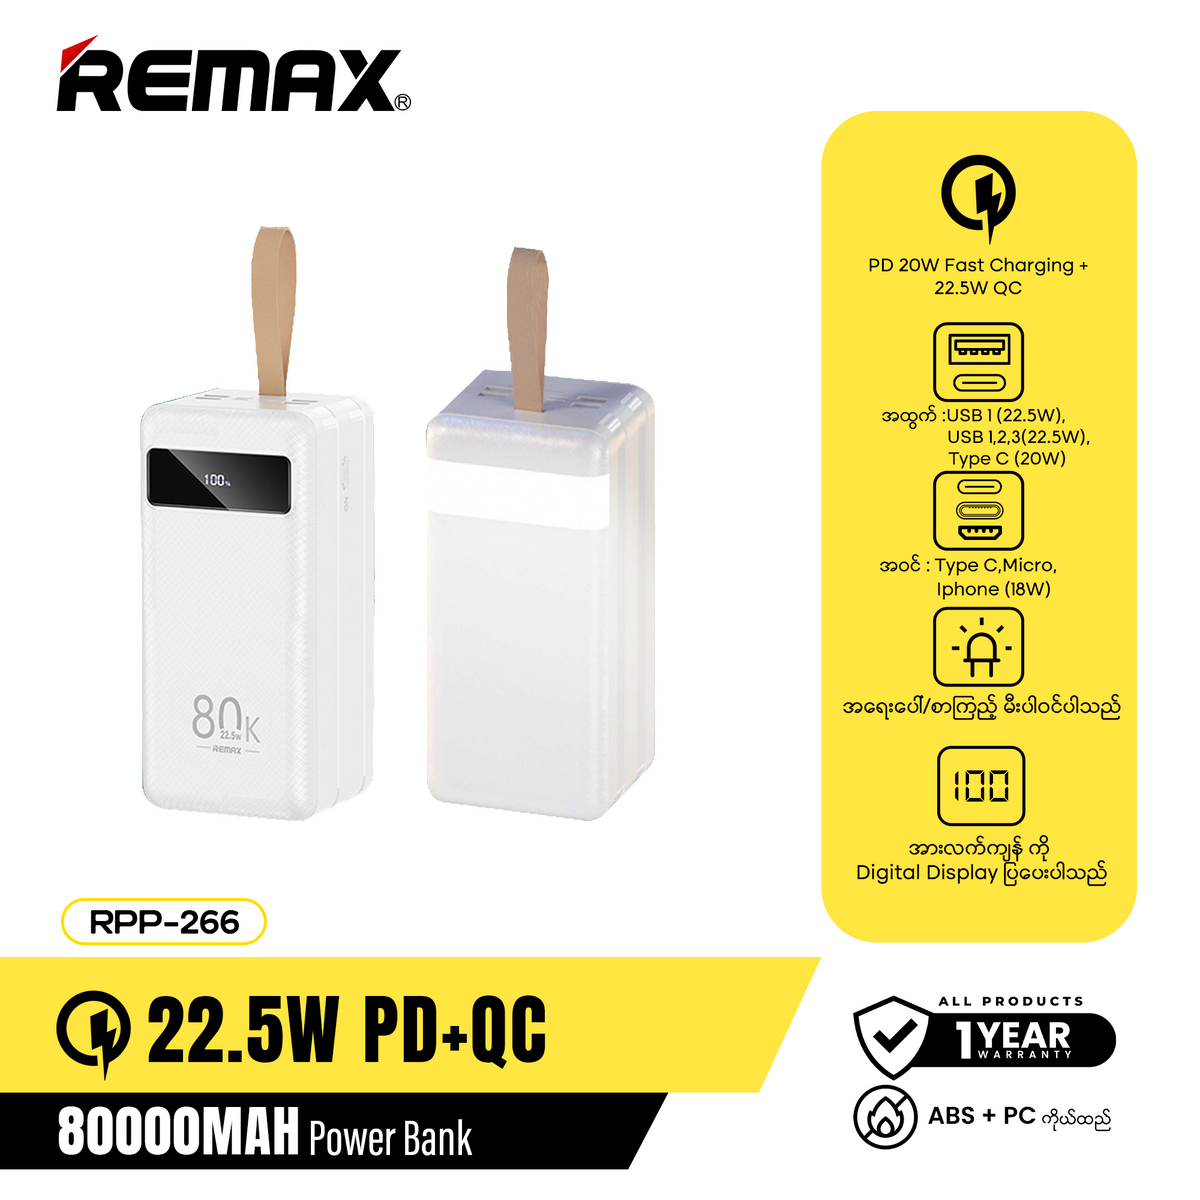 Remax RPP-266 80000mAh 22.5W PD + QC Hunergy Series Multi-Compatible Power Bank - White